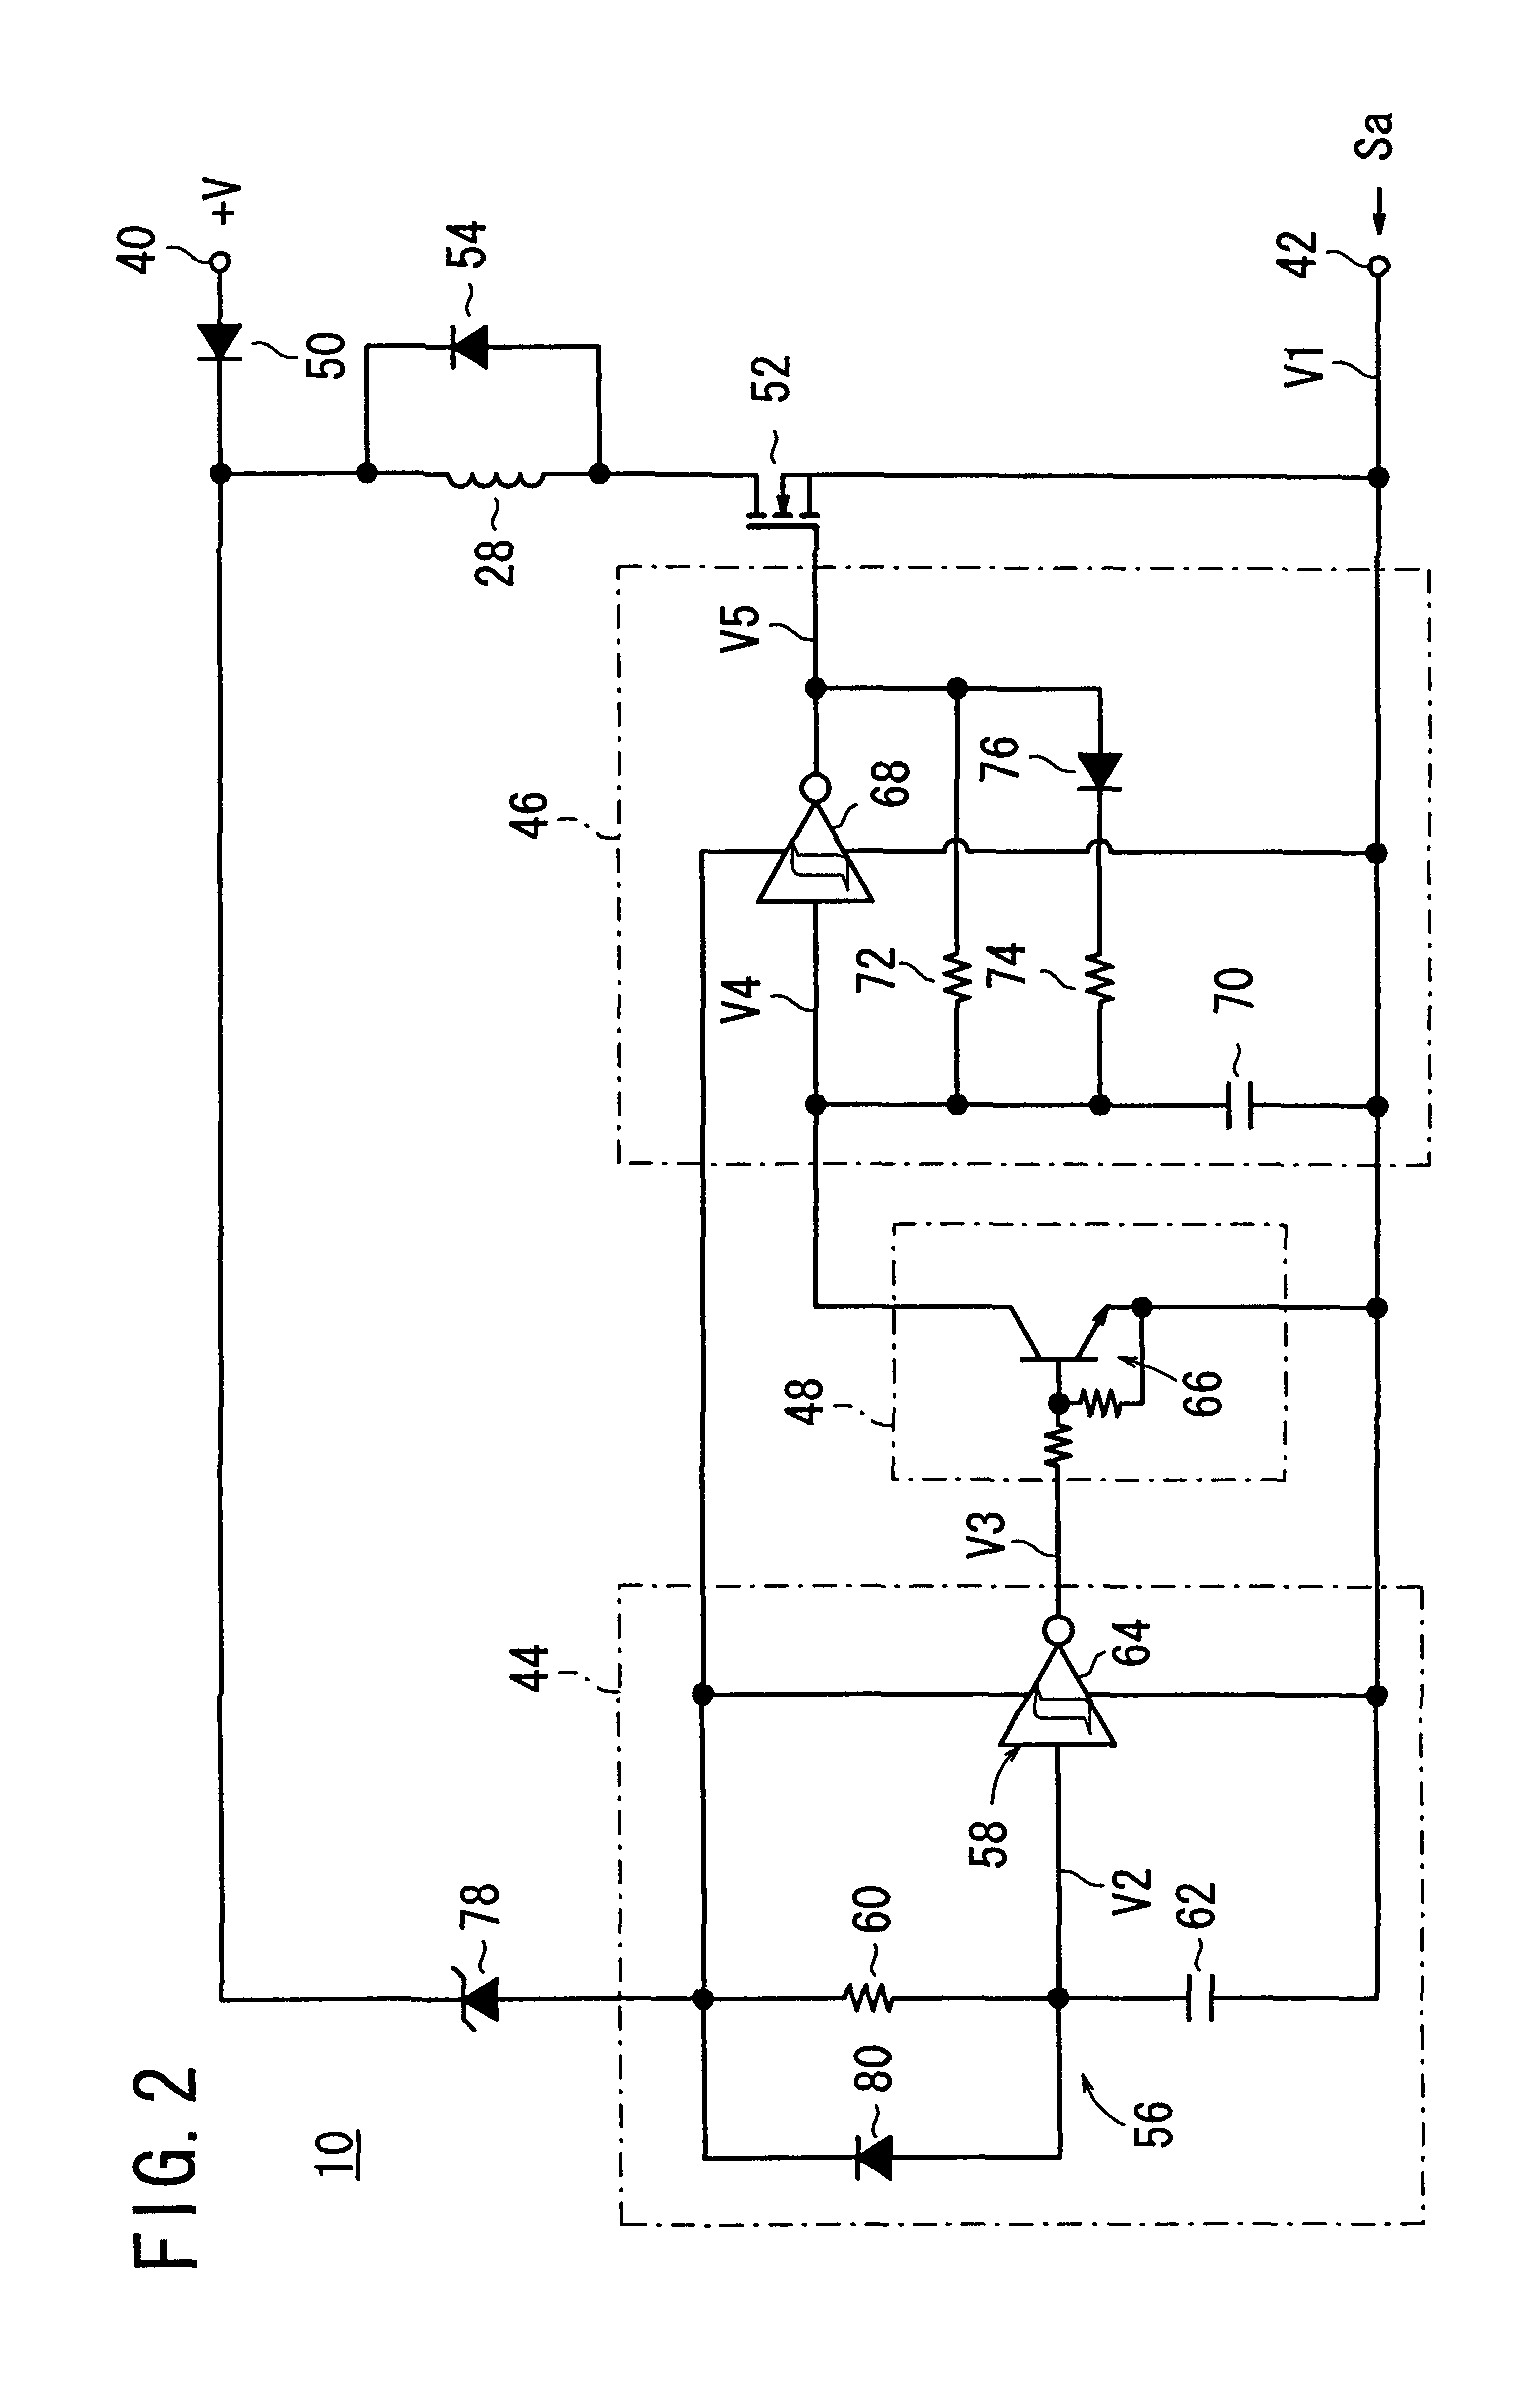 Solenoid-operated valve actuating controller